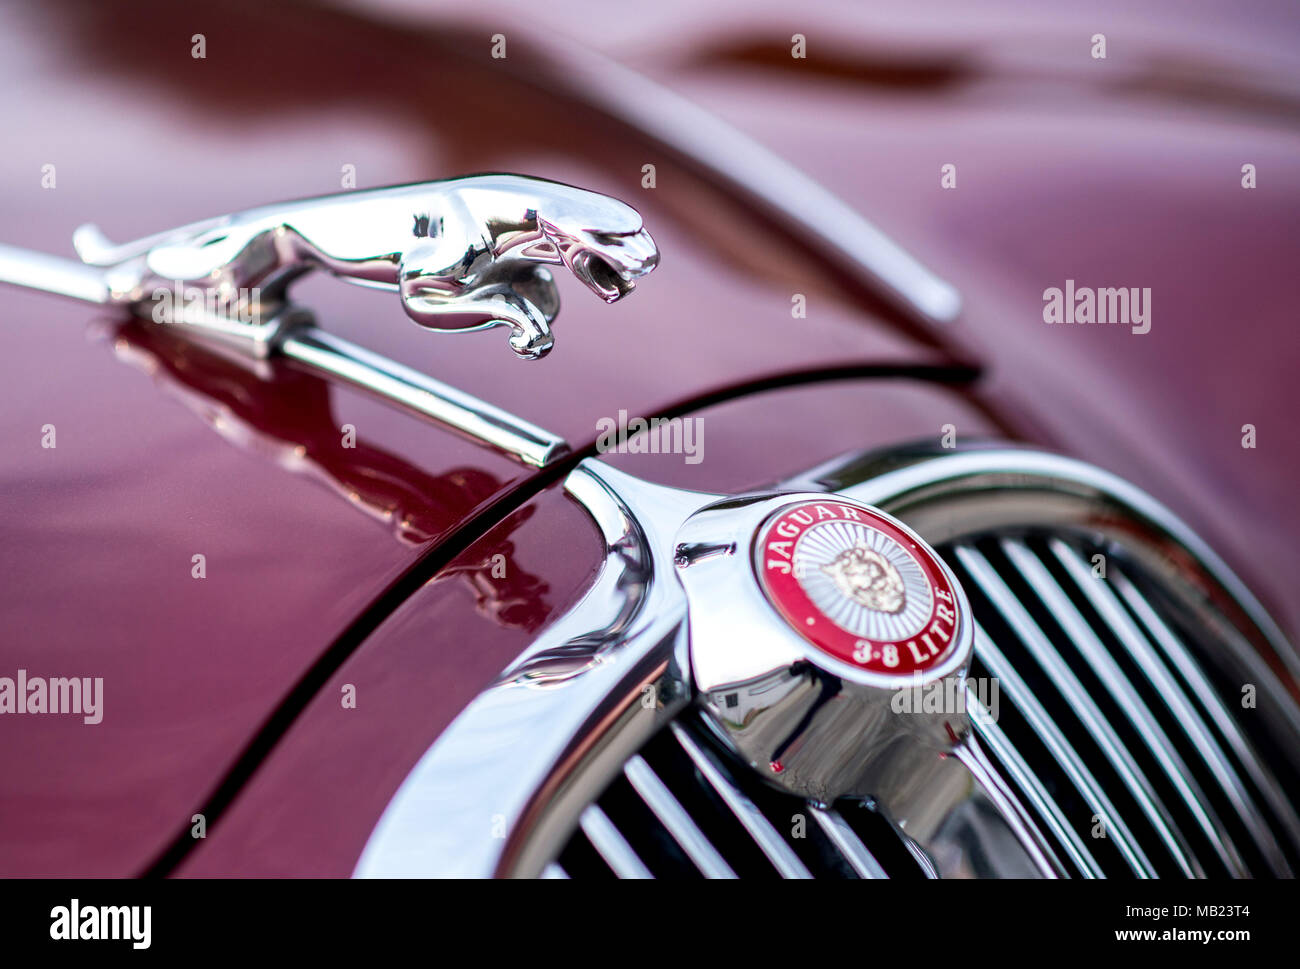 27 March 2018, Germany, Wolfsburg: A juaguar figurine decorates the hood of  the Jaguar S-Type belonging to vintage car collector Horst F. Beilharz.  Photo: Hauke-Christian Dittrich/dpa Stock Photo - Alamy